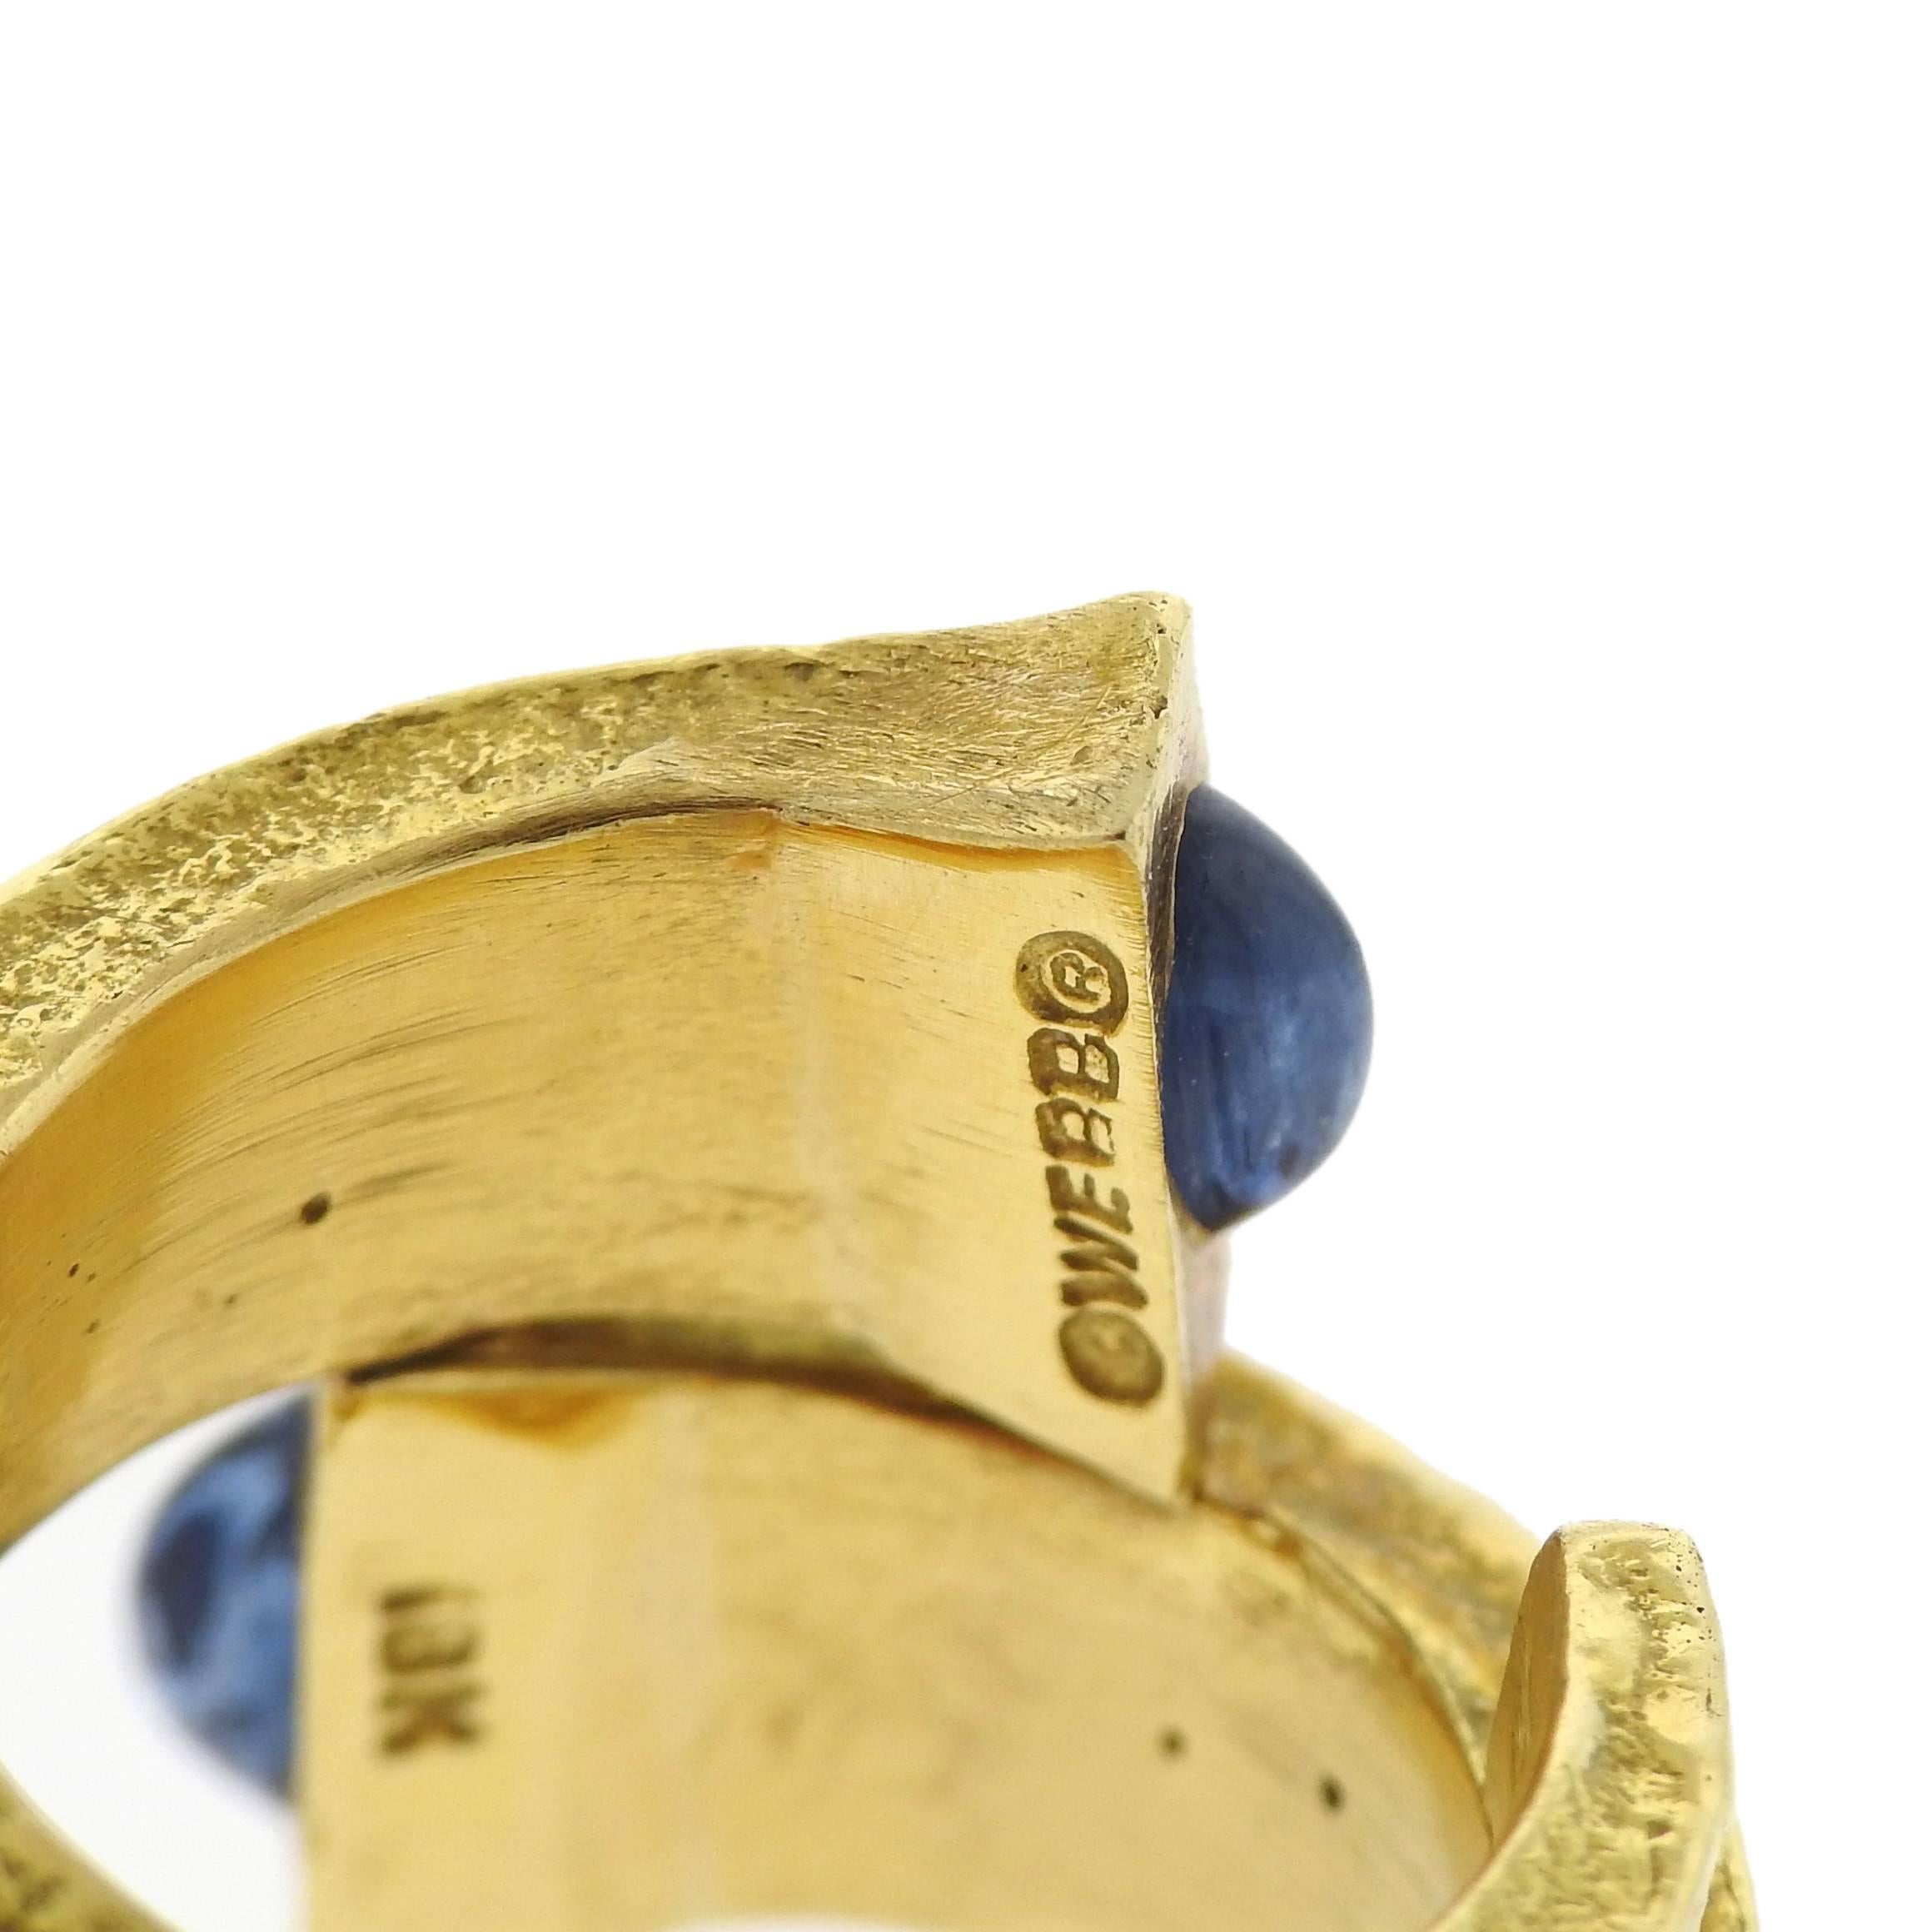 An 18k yellow gold ring, featuring wrap around nail design, adorned with blue sapphire cabochons. Crafted by David Webb, Ring size - 6 1/4, ring top is 20mm at widest point. Marked: Webb, 18k. Weight of the ring - 26.1 grams